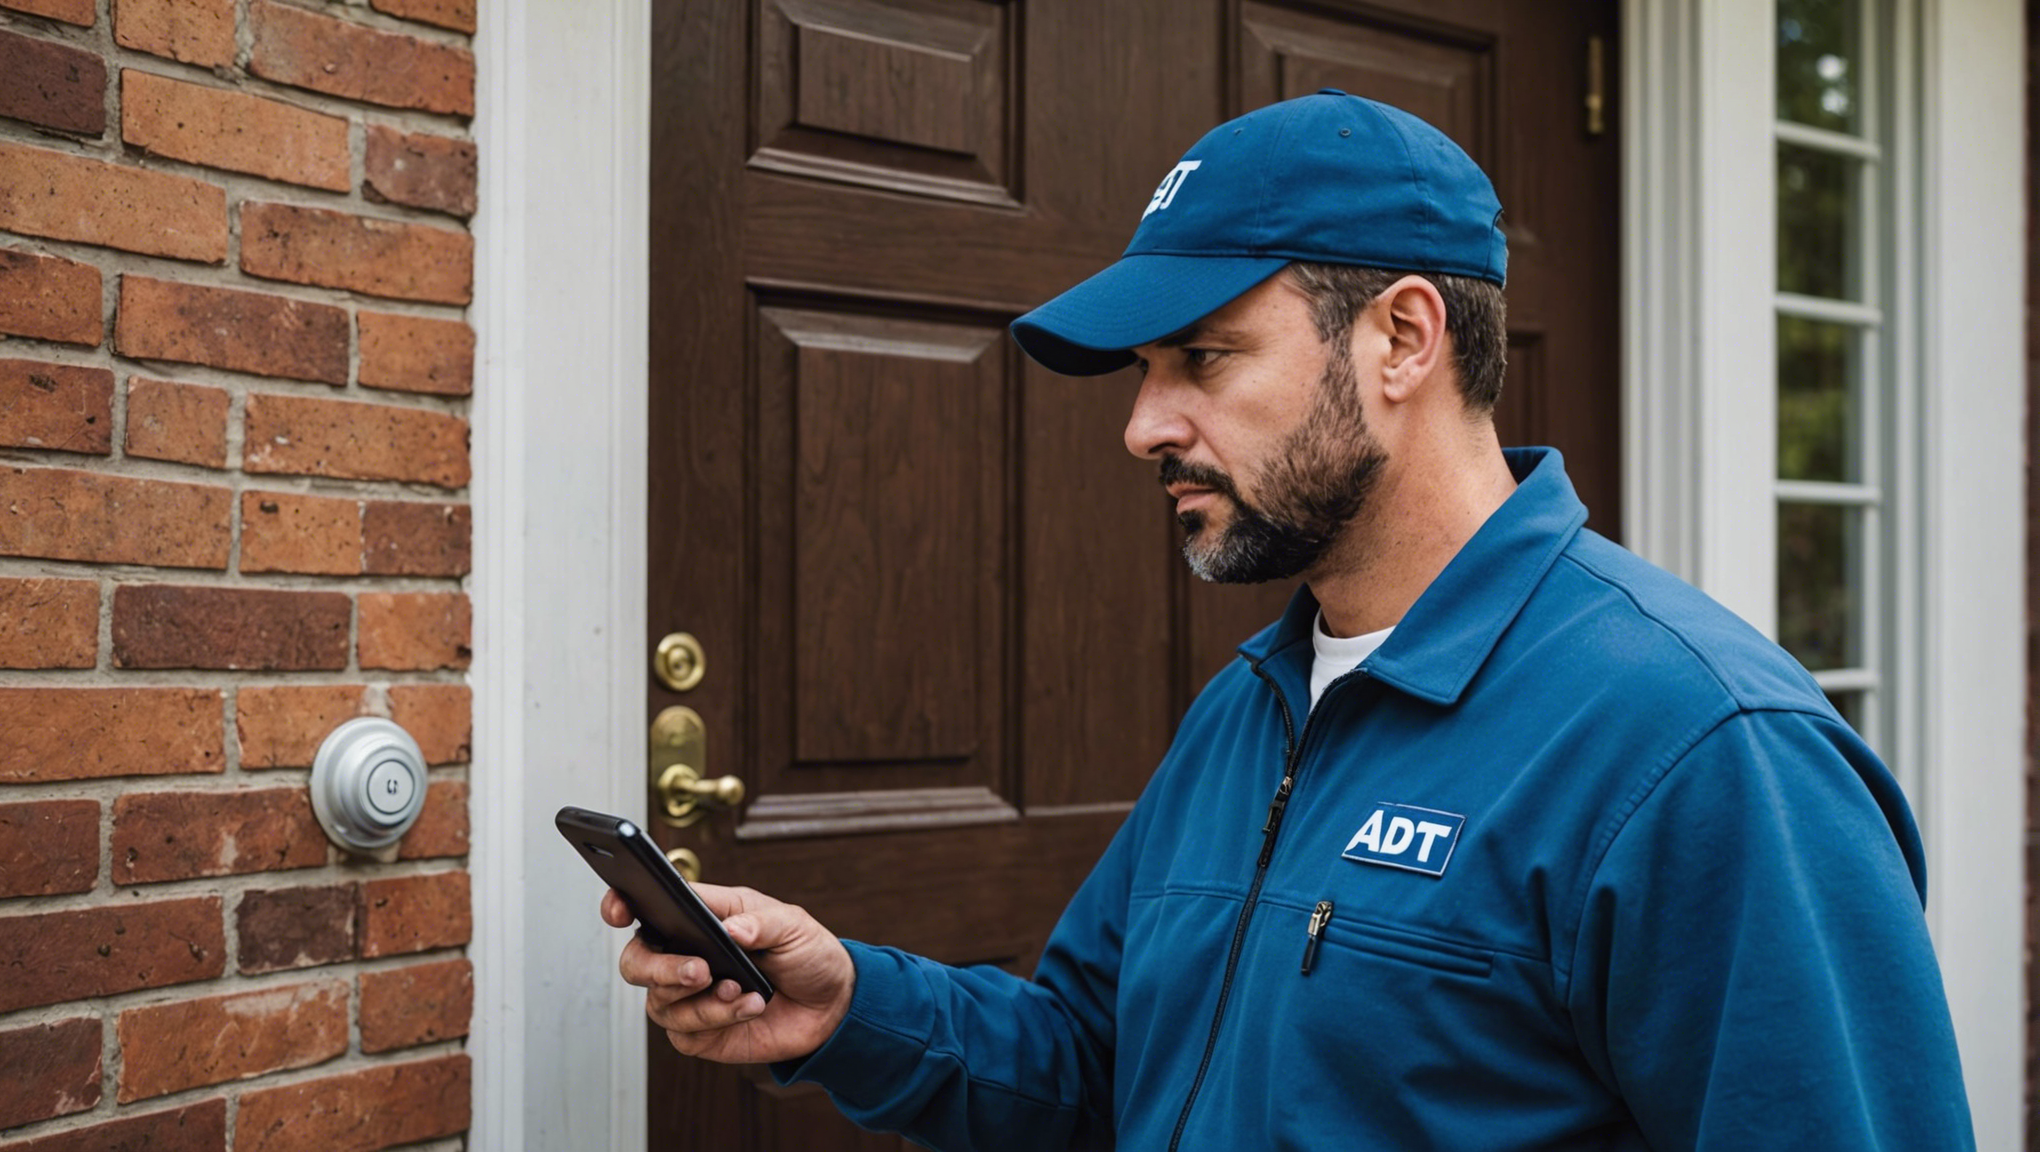 protect your home with adt. learn about the alarming increase in door-knocking and phone scams and how to secure your home from potential security risks.